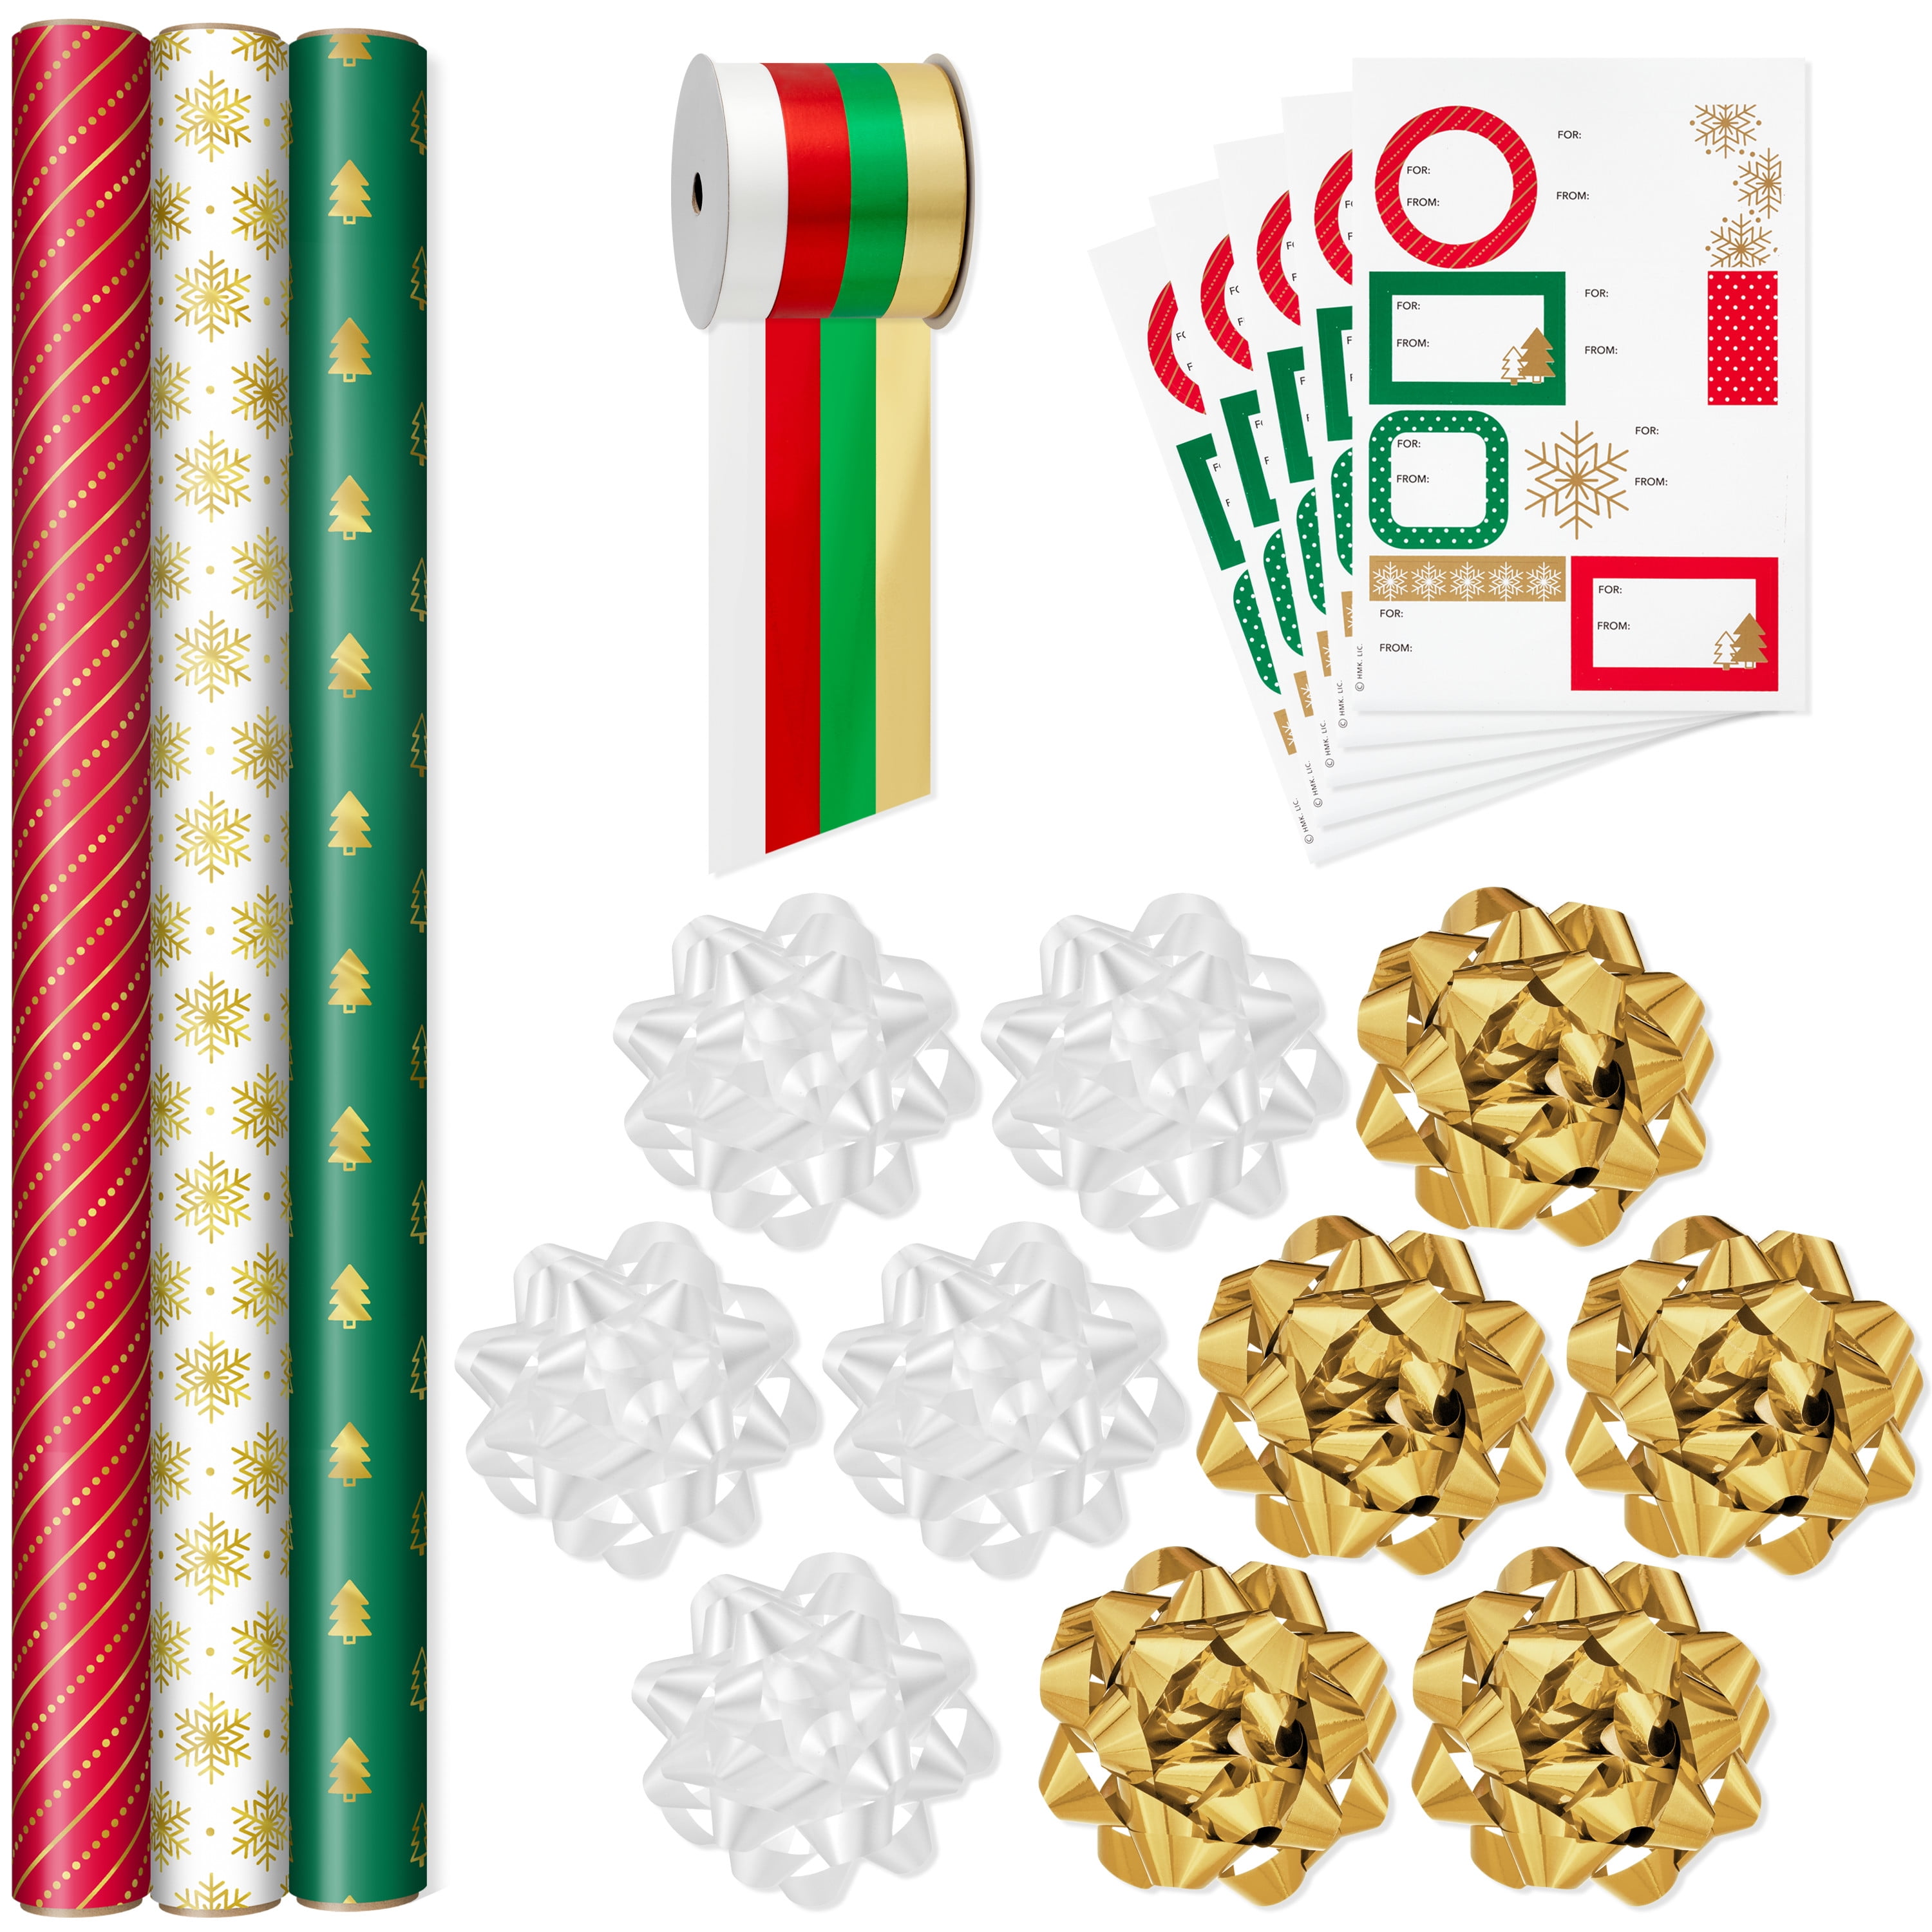 Hallmark Wrapping Paper Christmas Gold Glitter Dots On Green 35 sq ft Roll  Gift